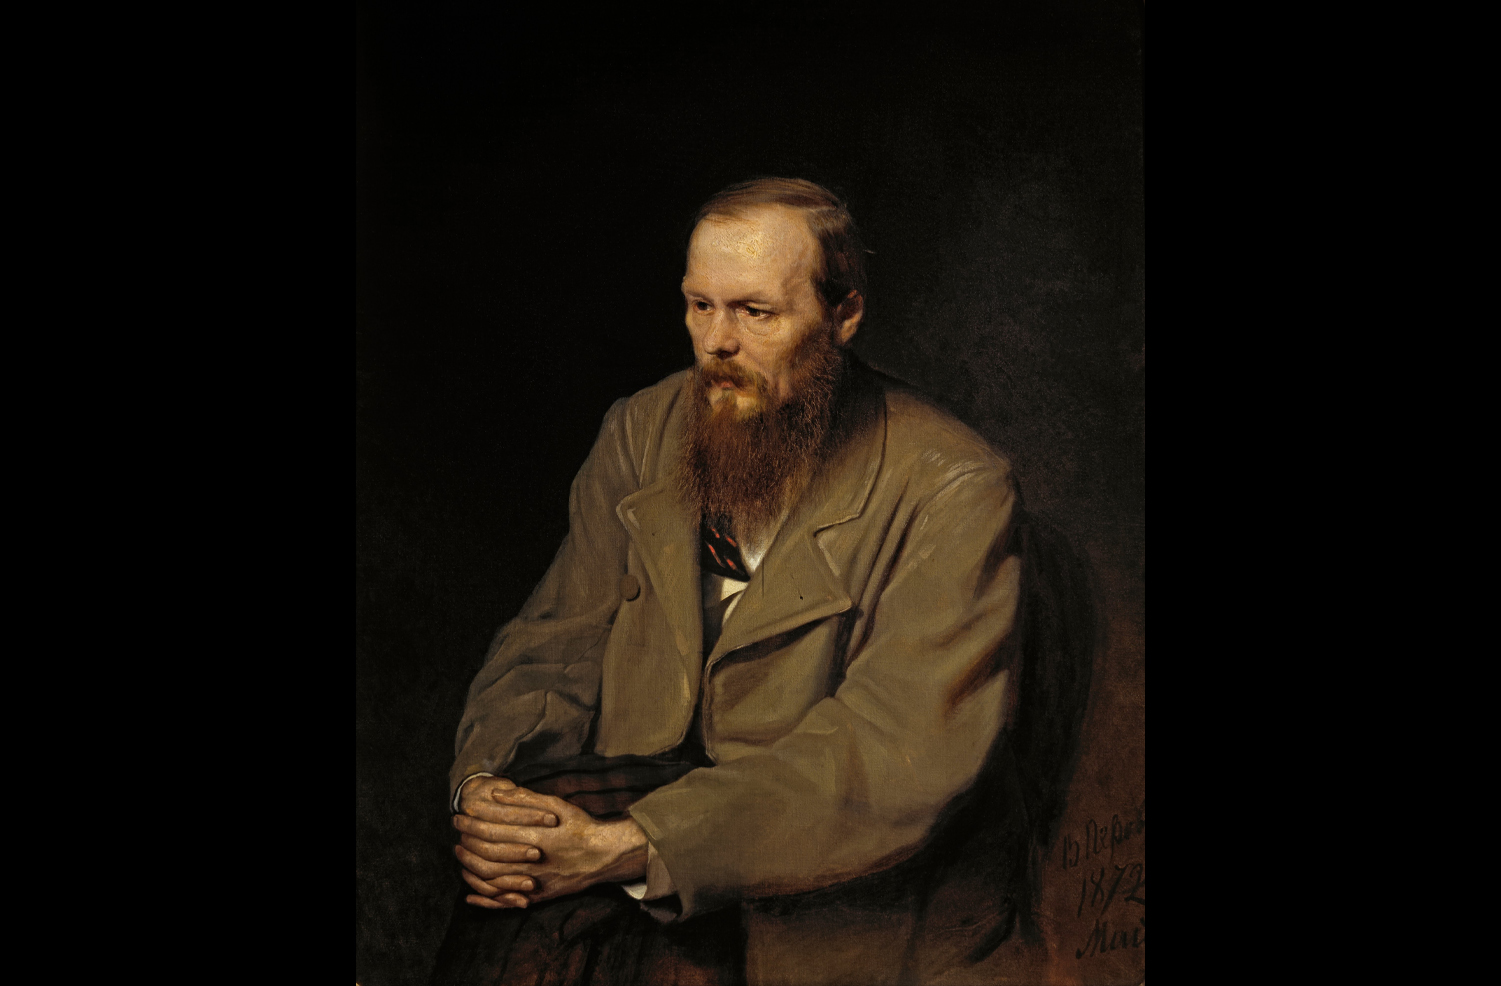 Here is a solemn portrait of Fyodor Mikhailovich Dostoevsky in his later years. Photo Credit: Vasily Perov, Public domain, via Wikimedia Commons